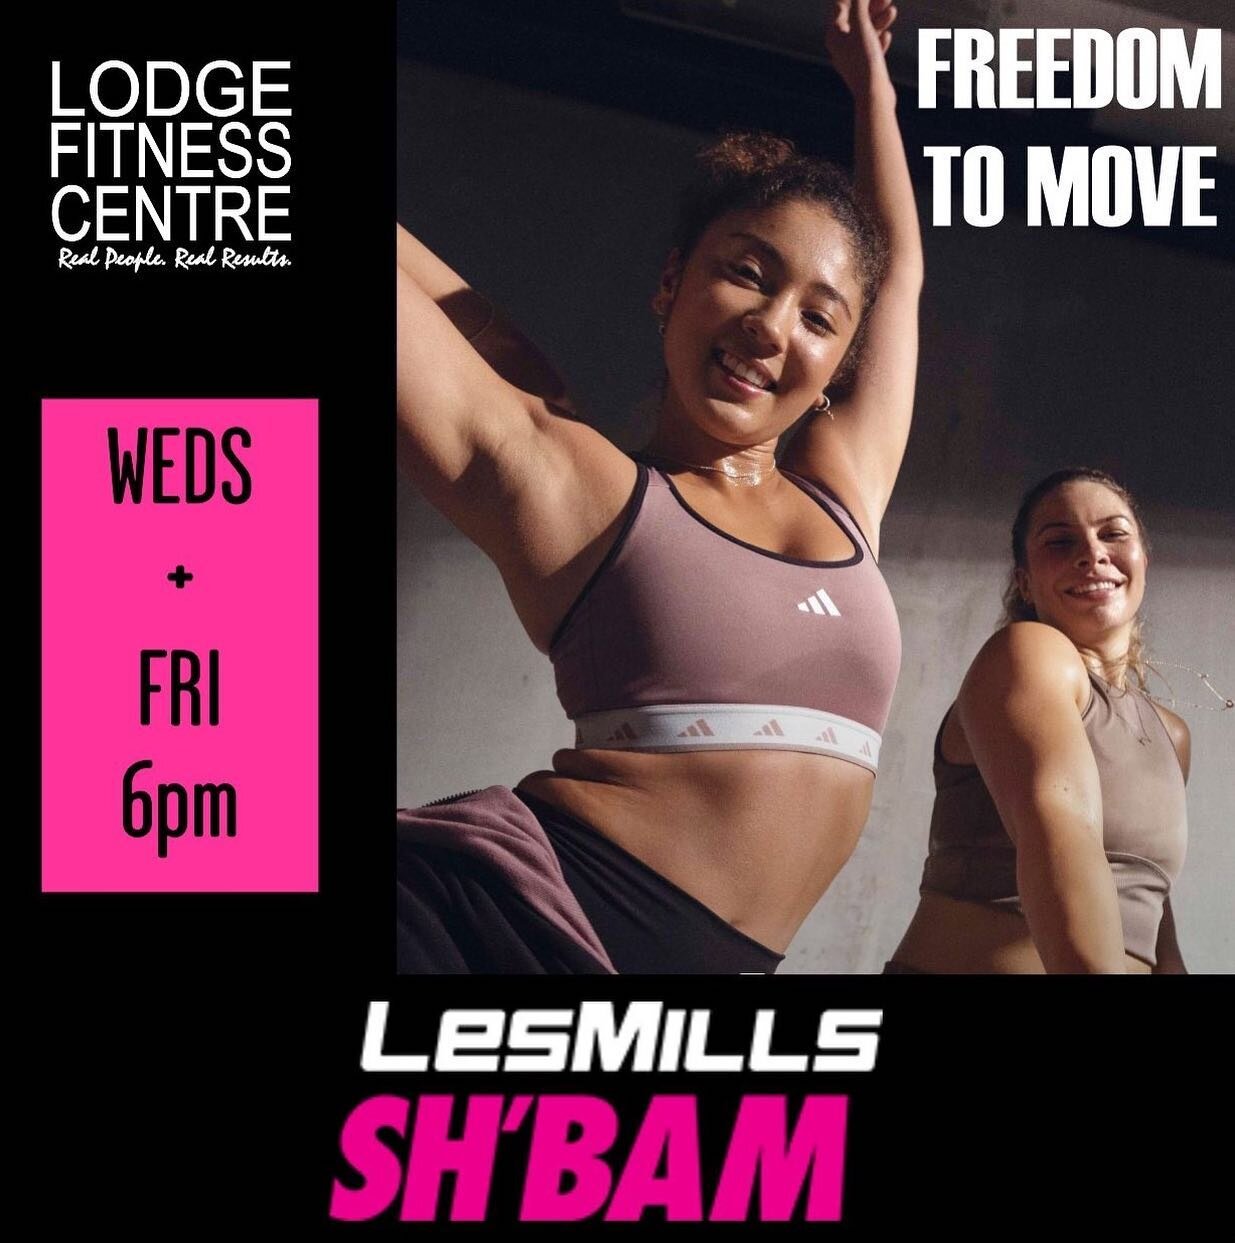 Have you tried SH&rsquo;BAM? Find your freedom to move with this easy to follow dance class. Join the party and BOOK NOW on the app! 💖